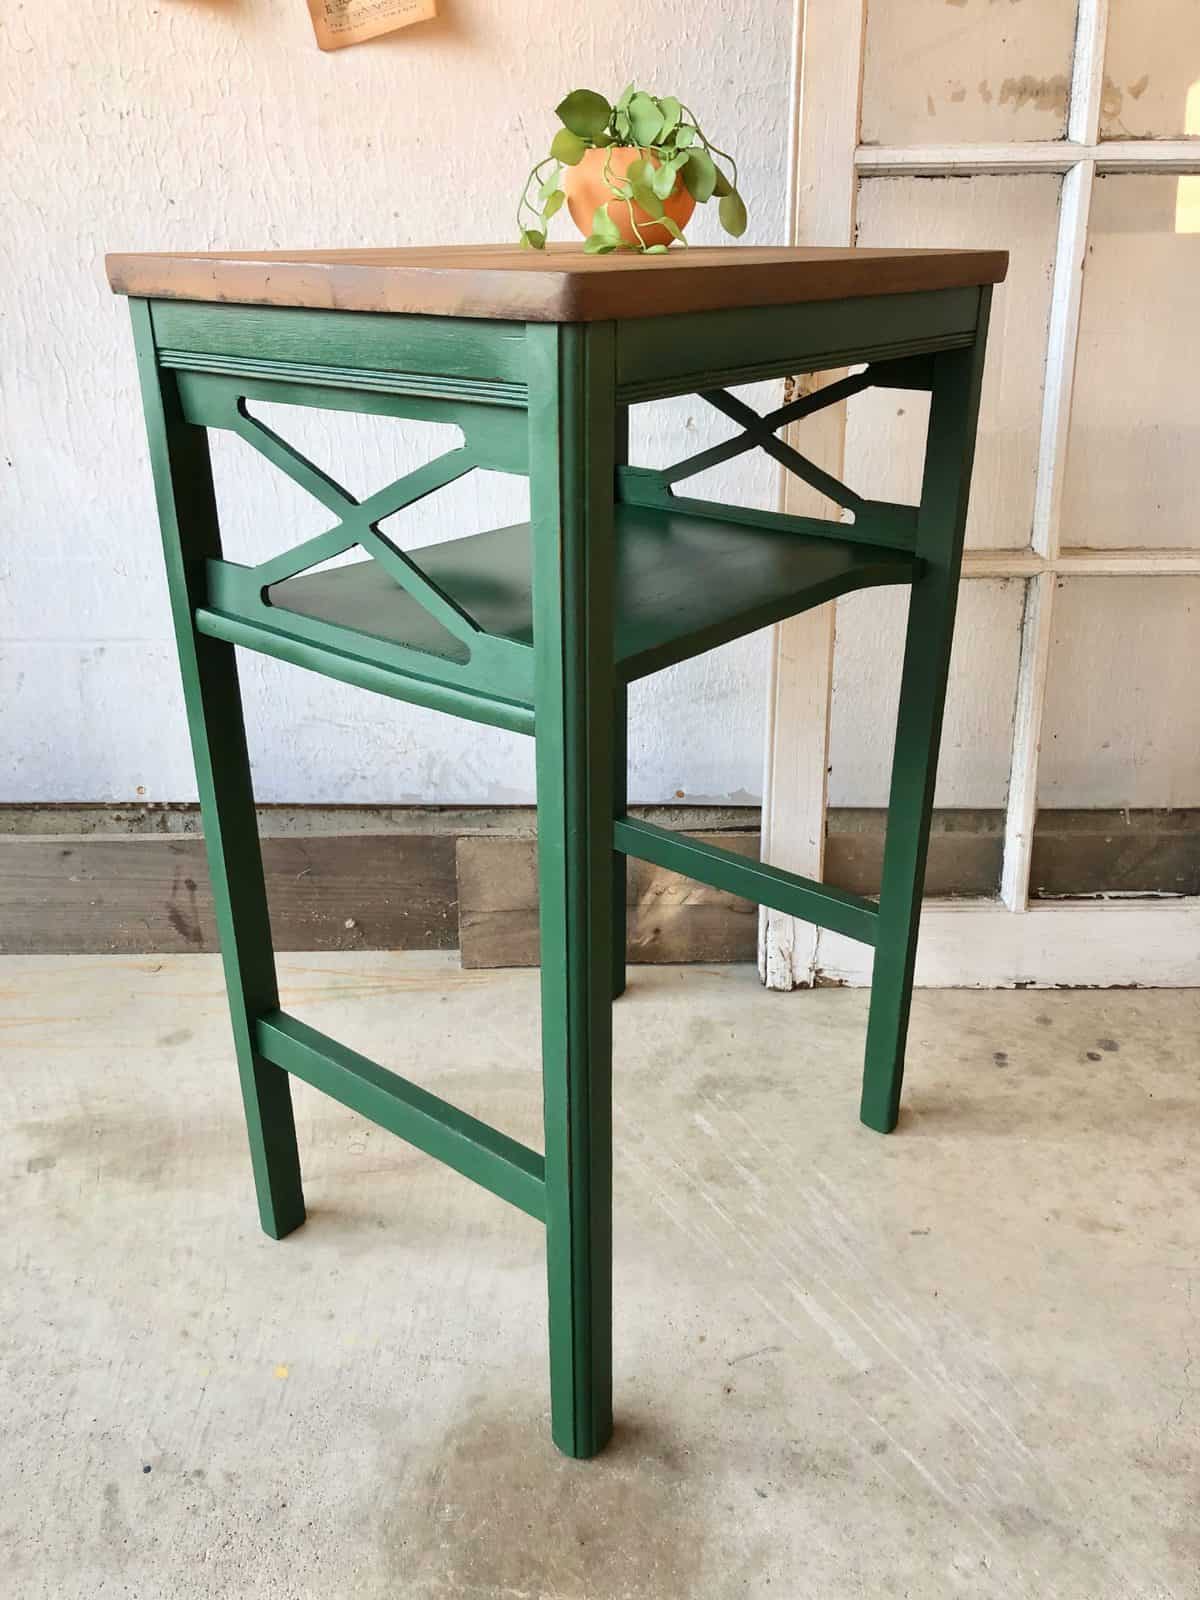 Fireworks emerald green painted side table in chalk style furniture paint